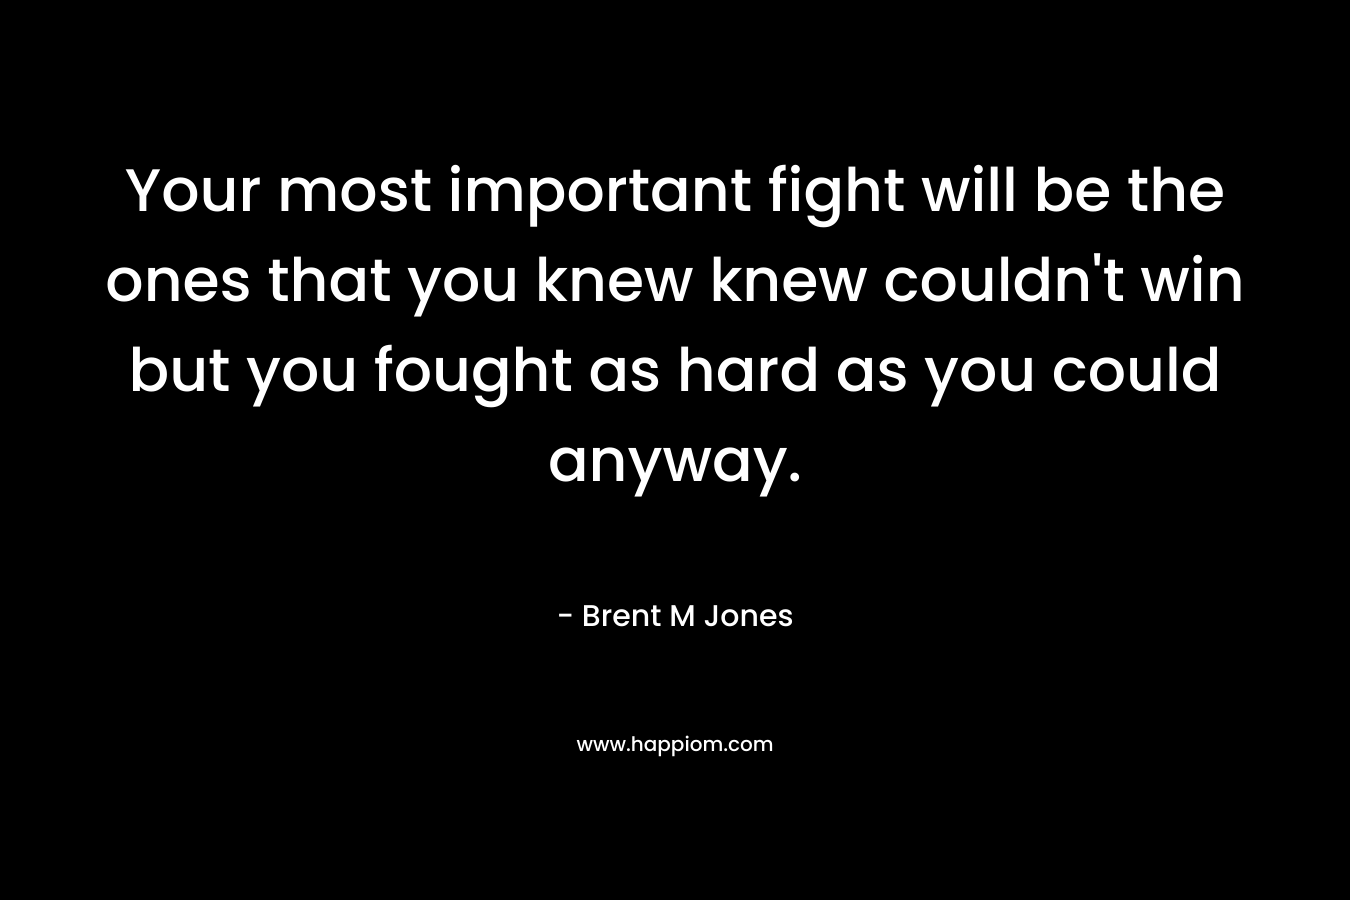 Your most important fight will be the ones that you knew knew couldn't win but you fought as hard as you could anyway.